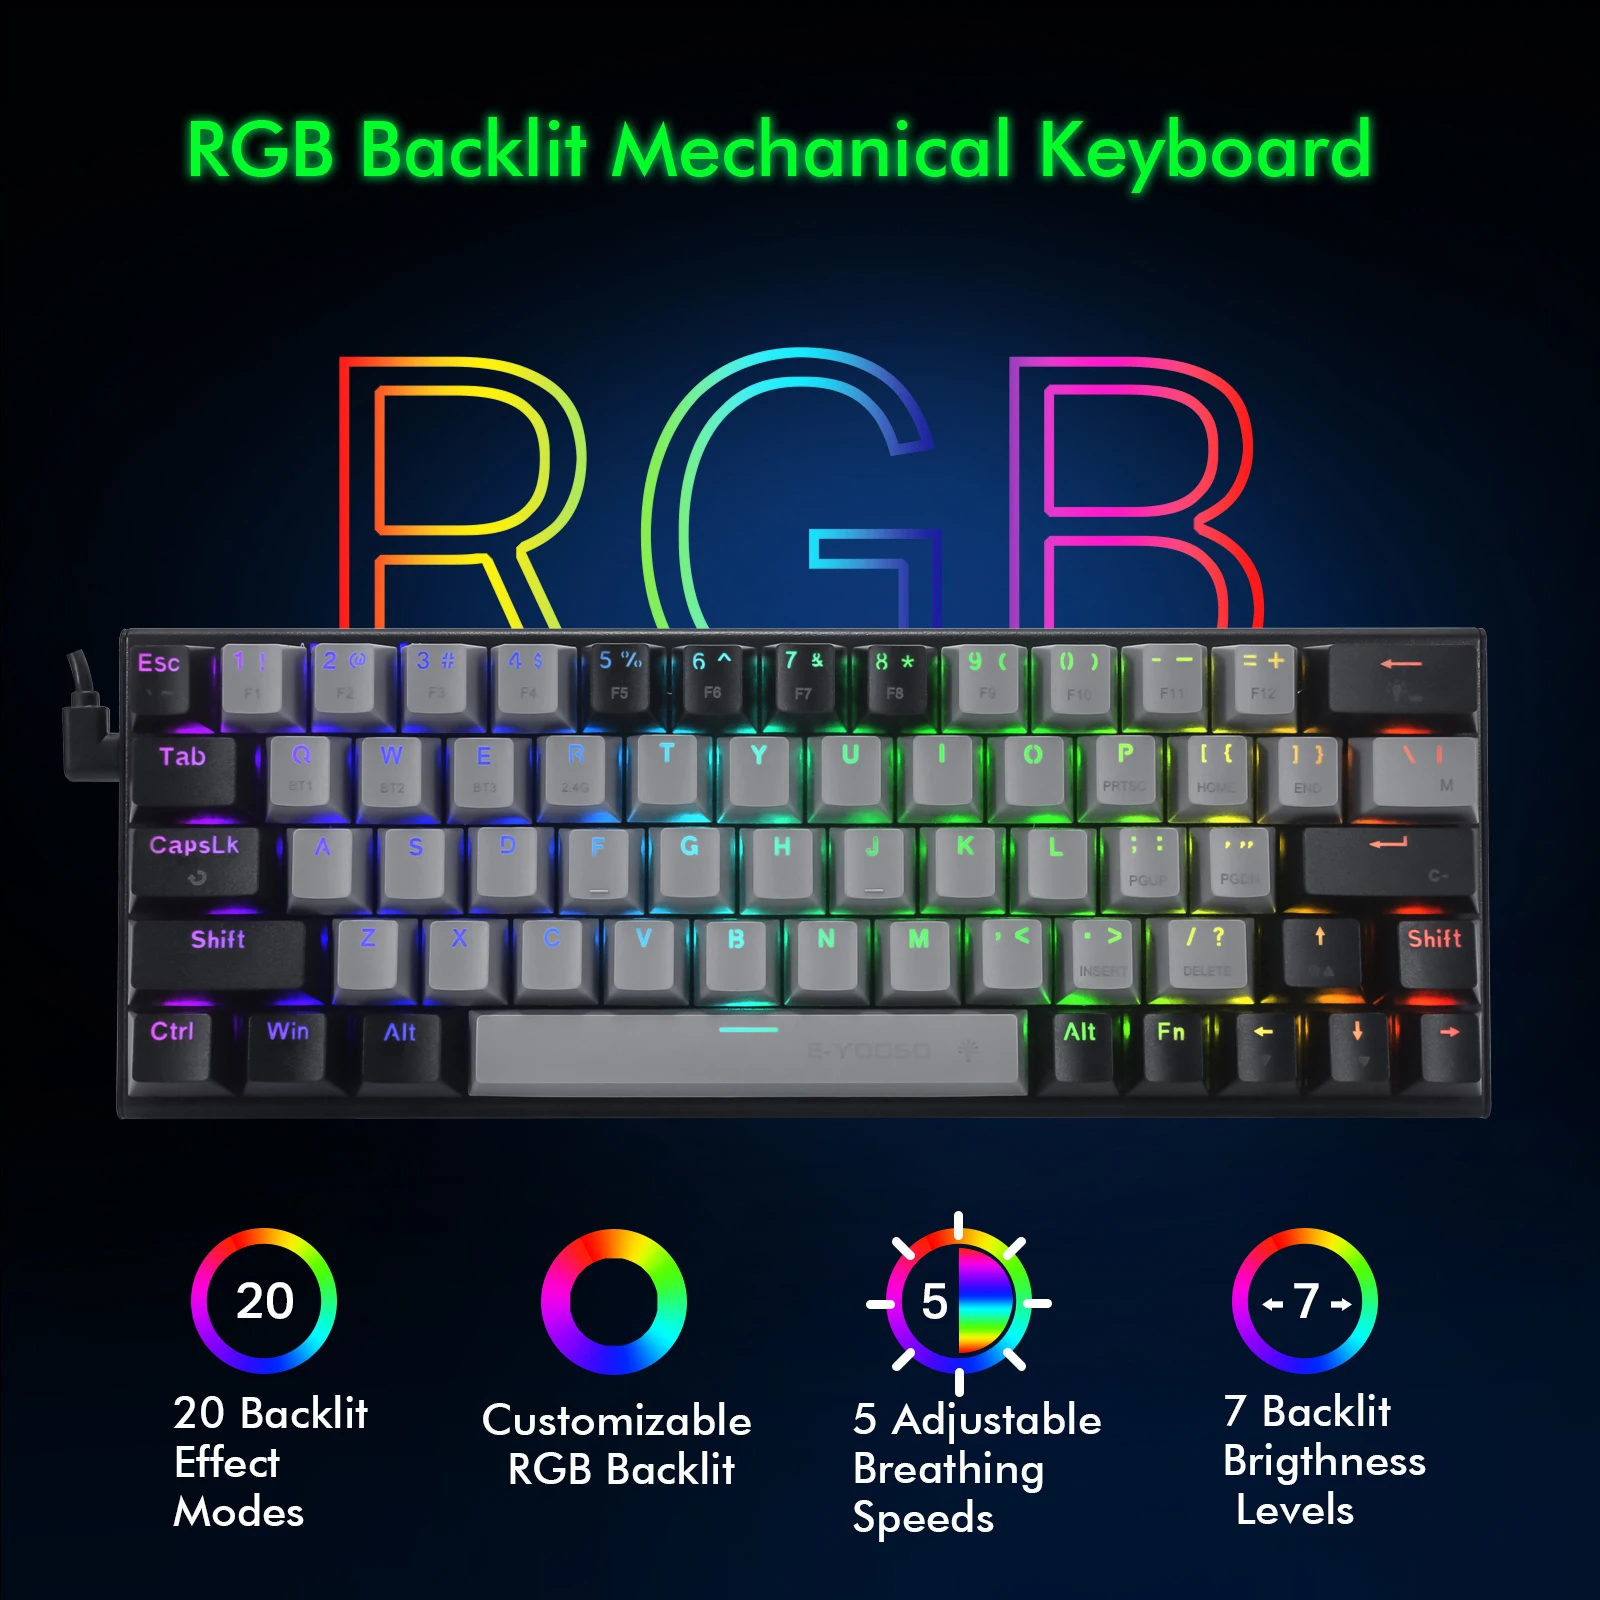 HUOJI Z11 63keys RGB Mechanical Gaming Keyboard Surpport Bluetooth/Wireless 2.4G/USB 3 mode with Red switch for PC,Laptop,Mac OS enlarge